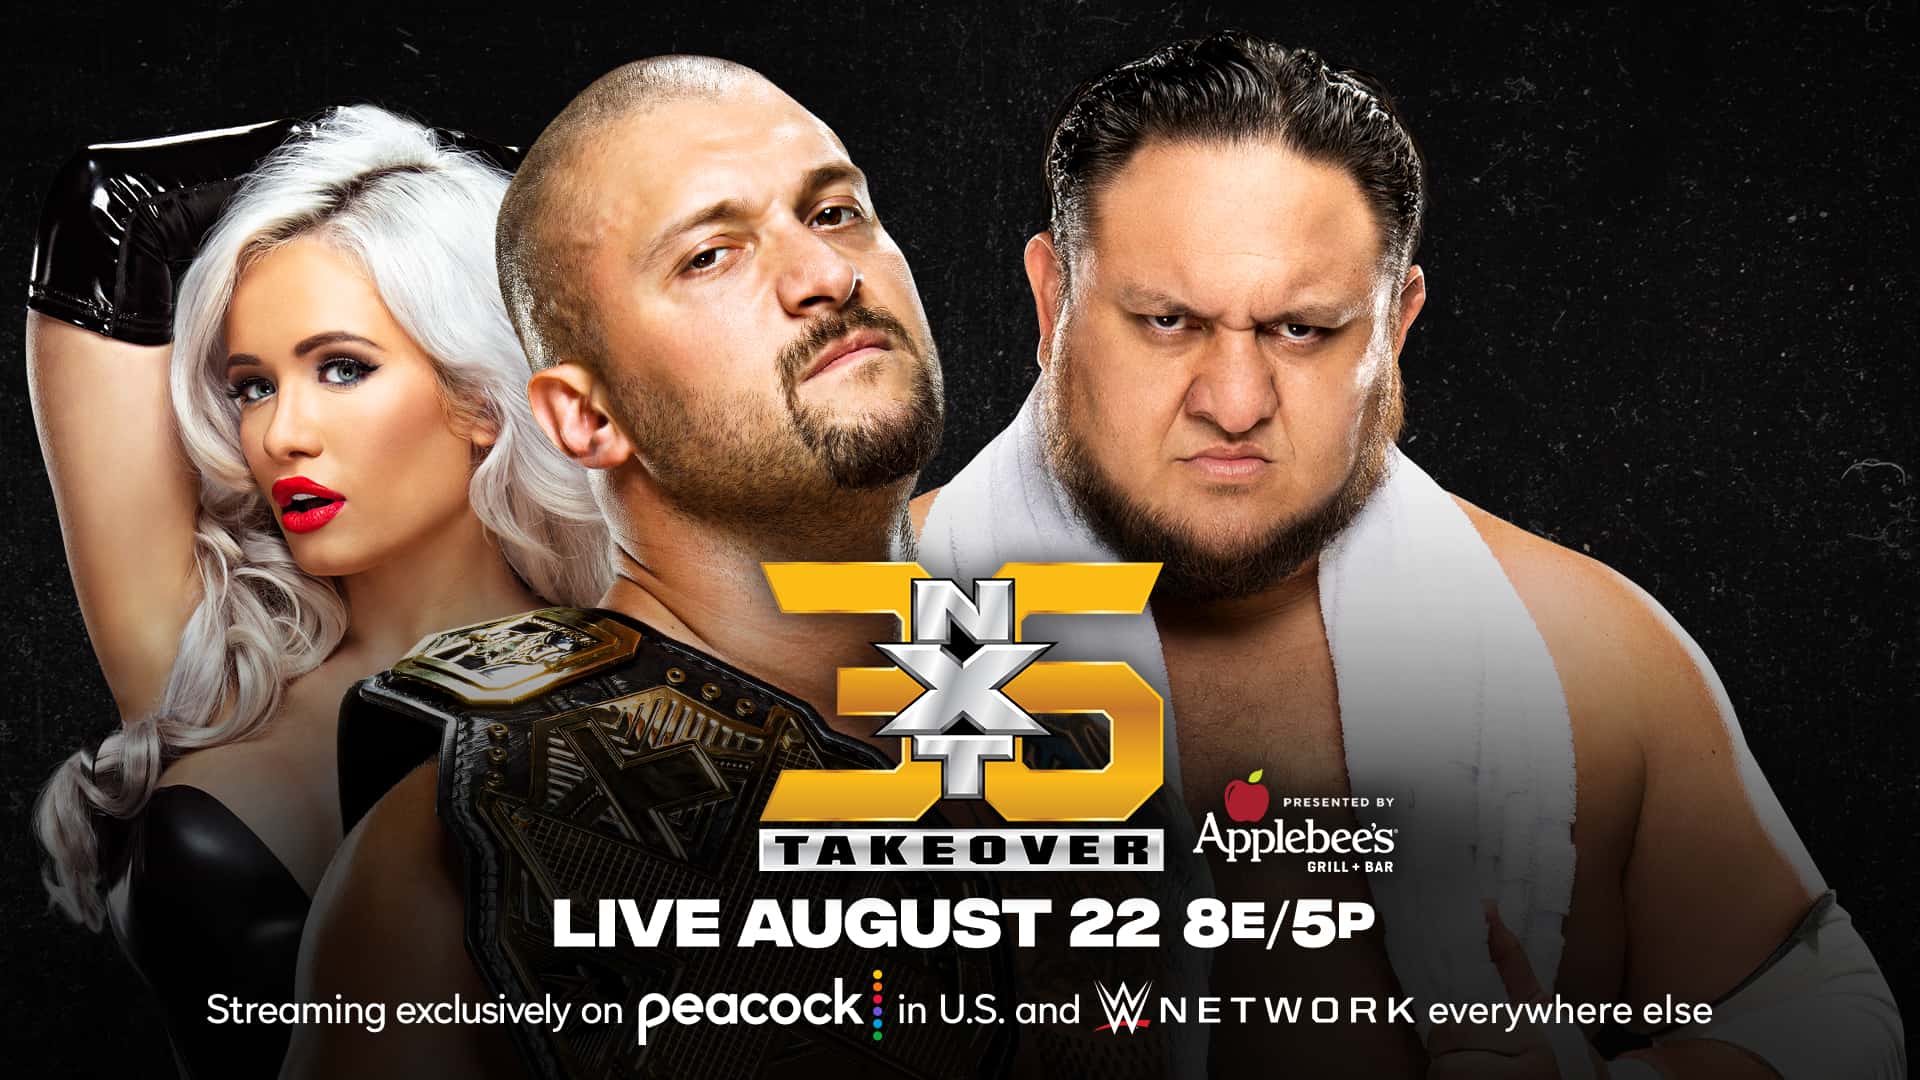 NXT TAKEOVER 36